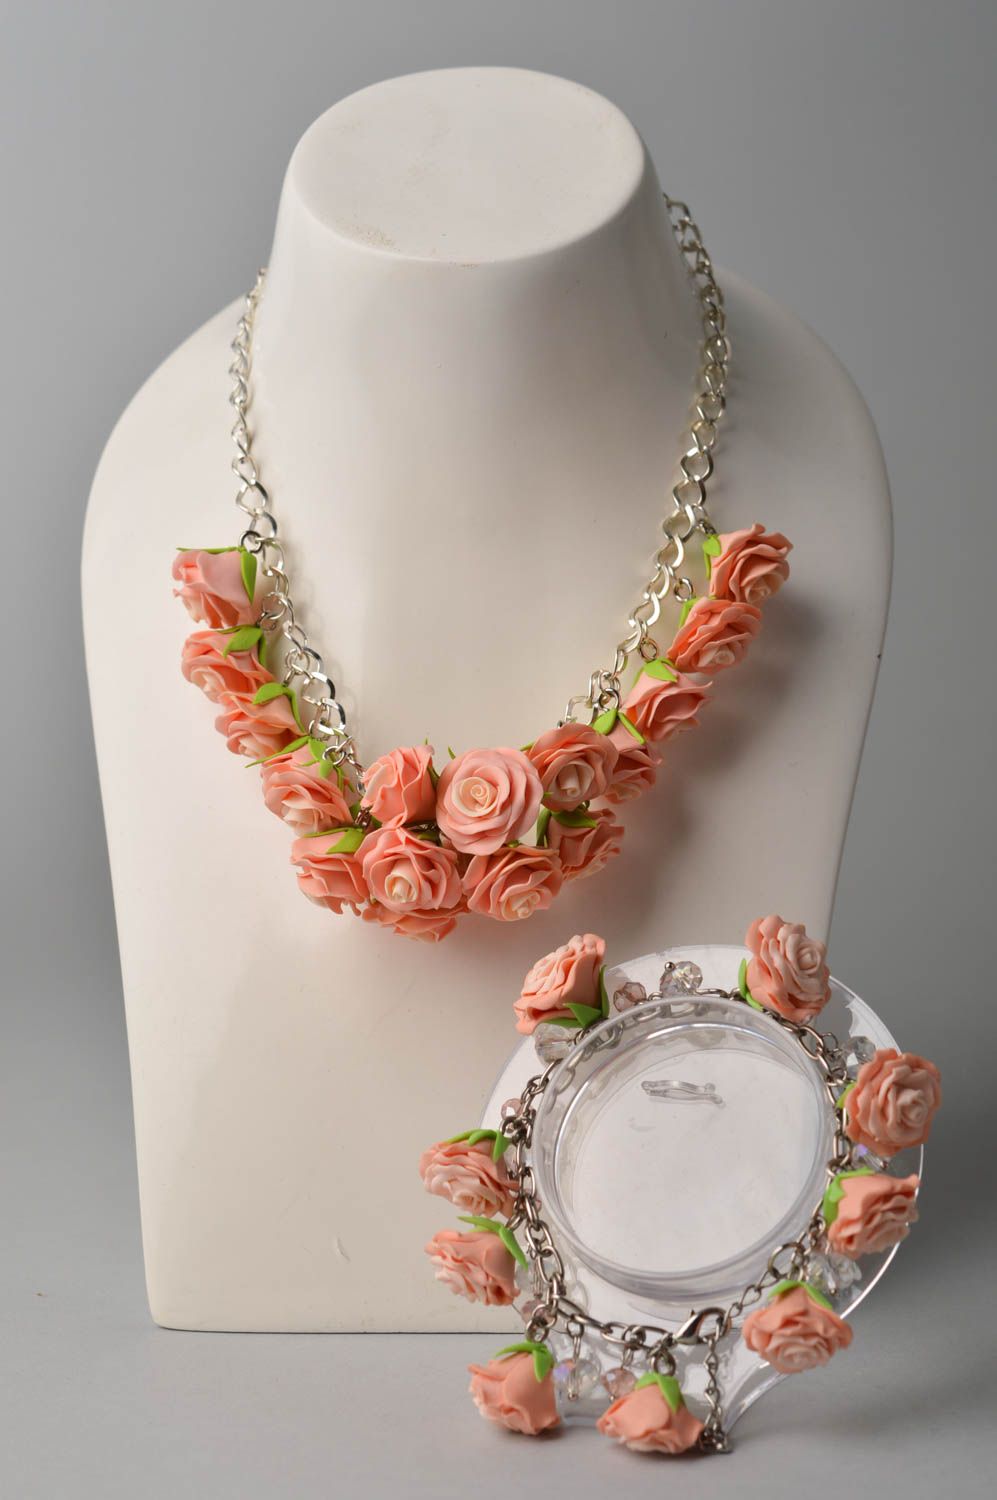 Chain acrylic pink roses necklace with a chain charm bracelet for mom photo 1